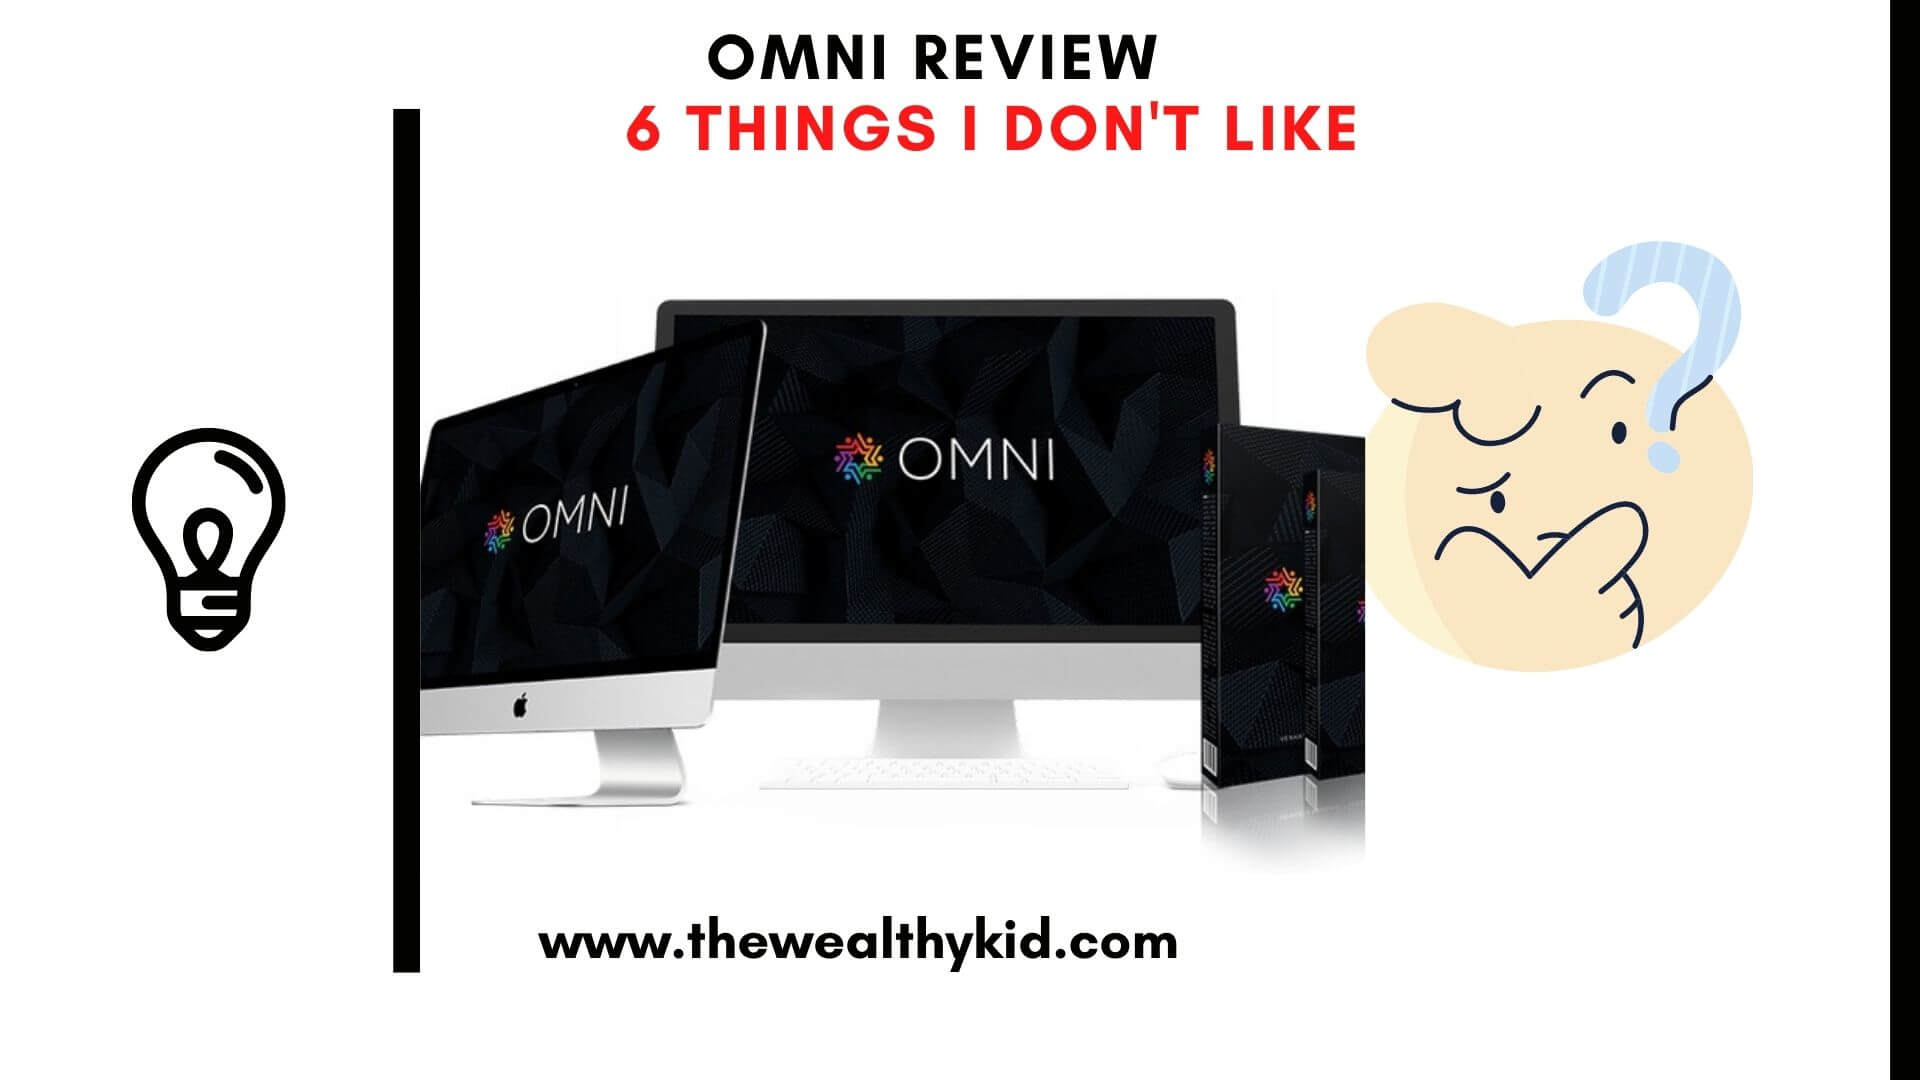 Omni software review